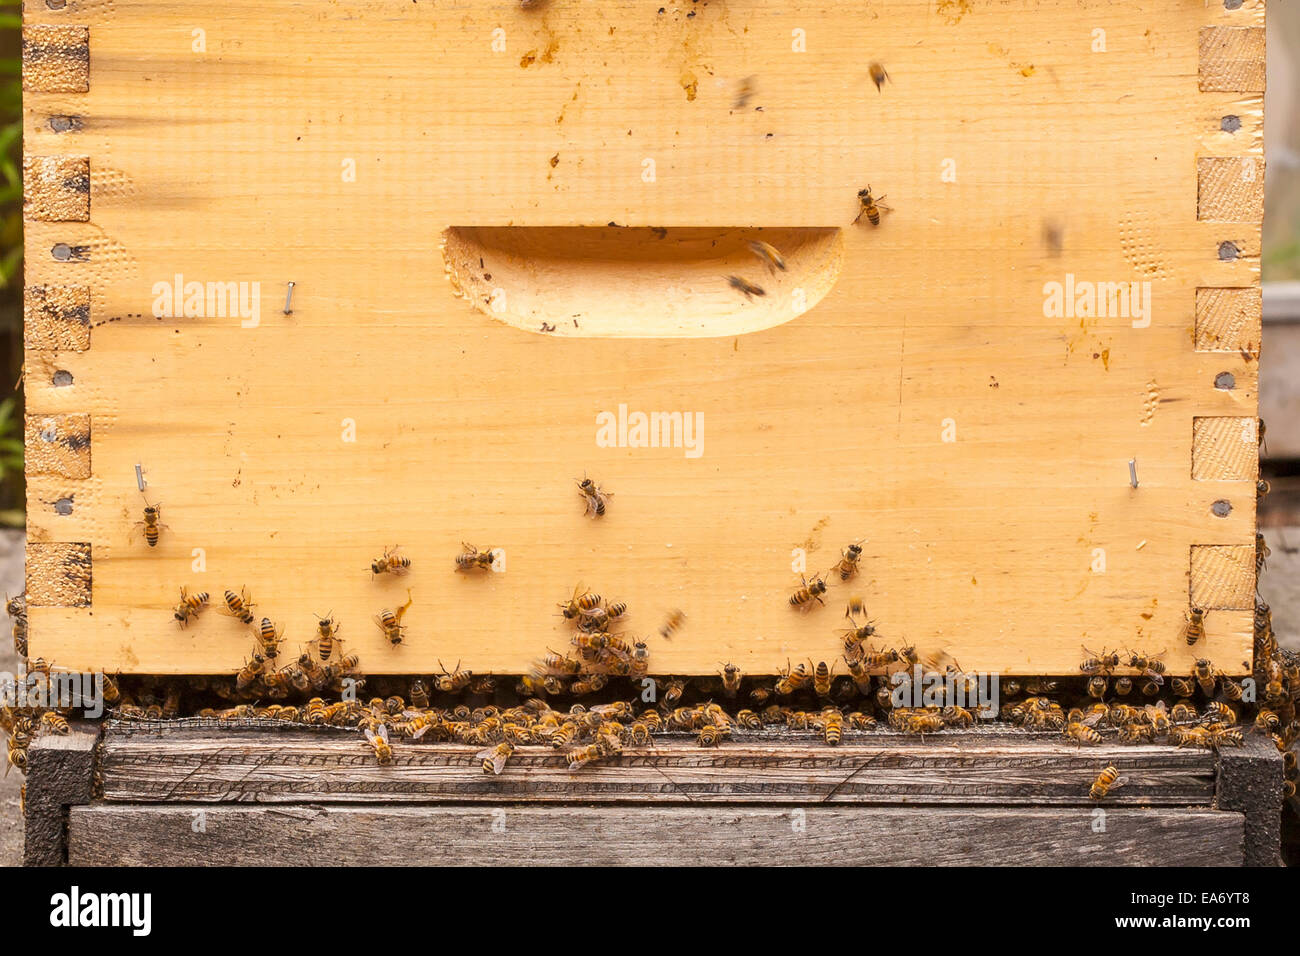 Busy honey bees in a Langstroth hive box; Toronto, Ontario, Canada Stock Photo